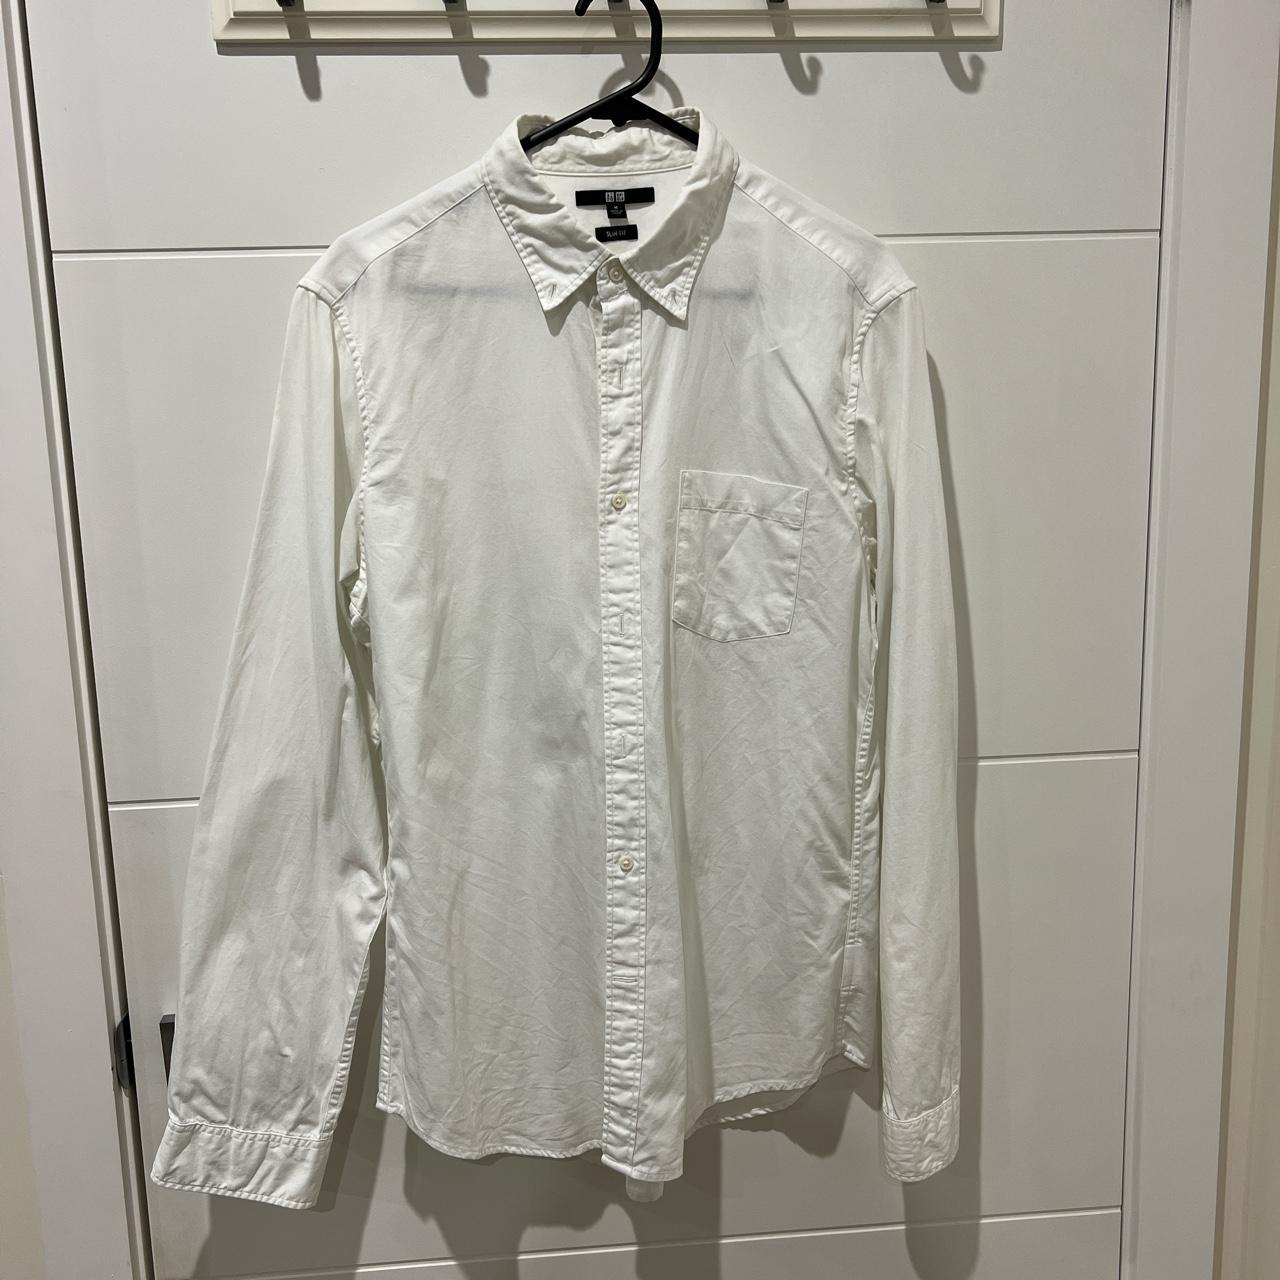 UNIQLO white shirt Oxford shirt style Only worn a... - Depop